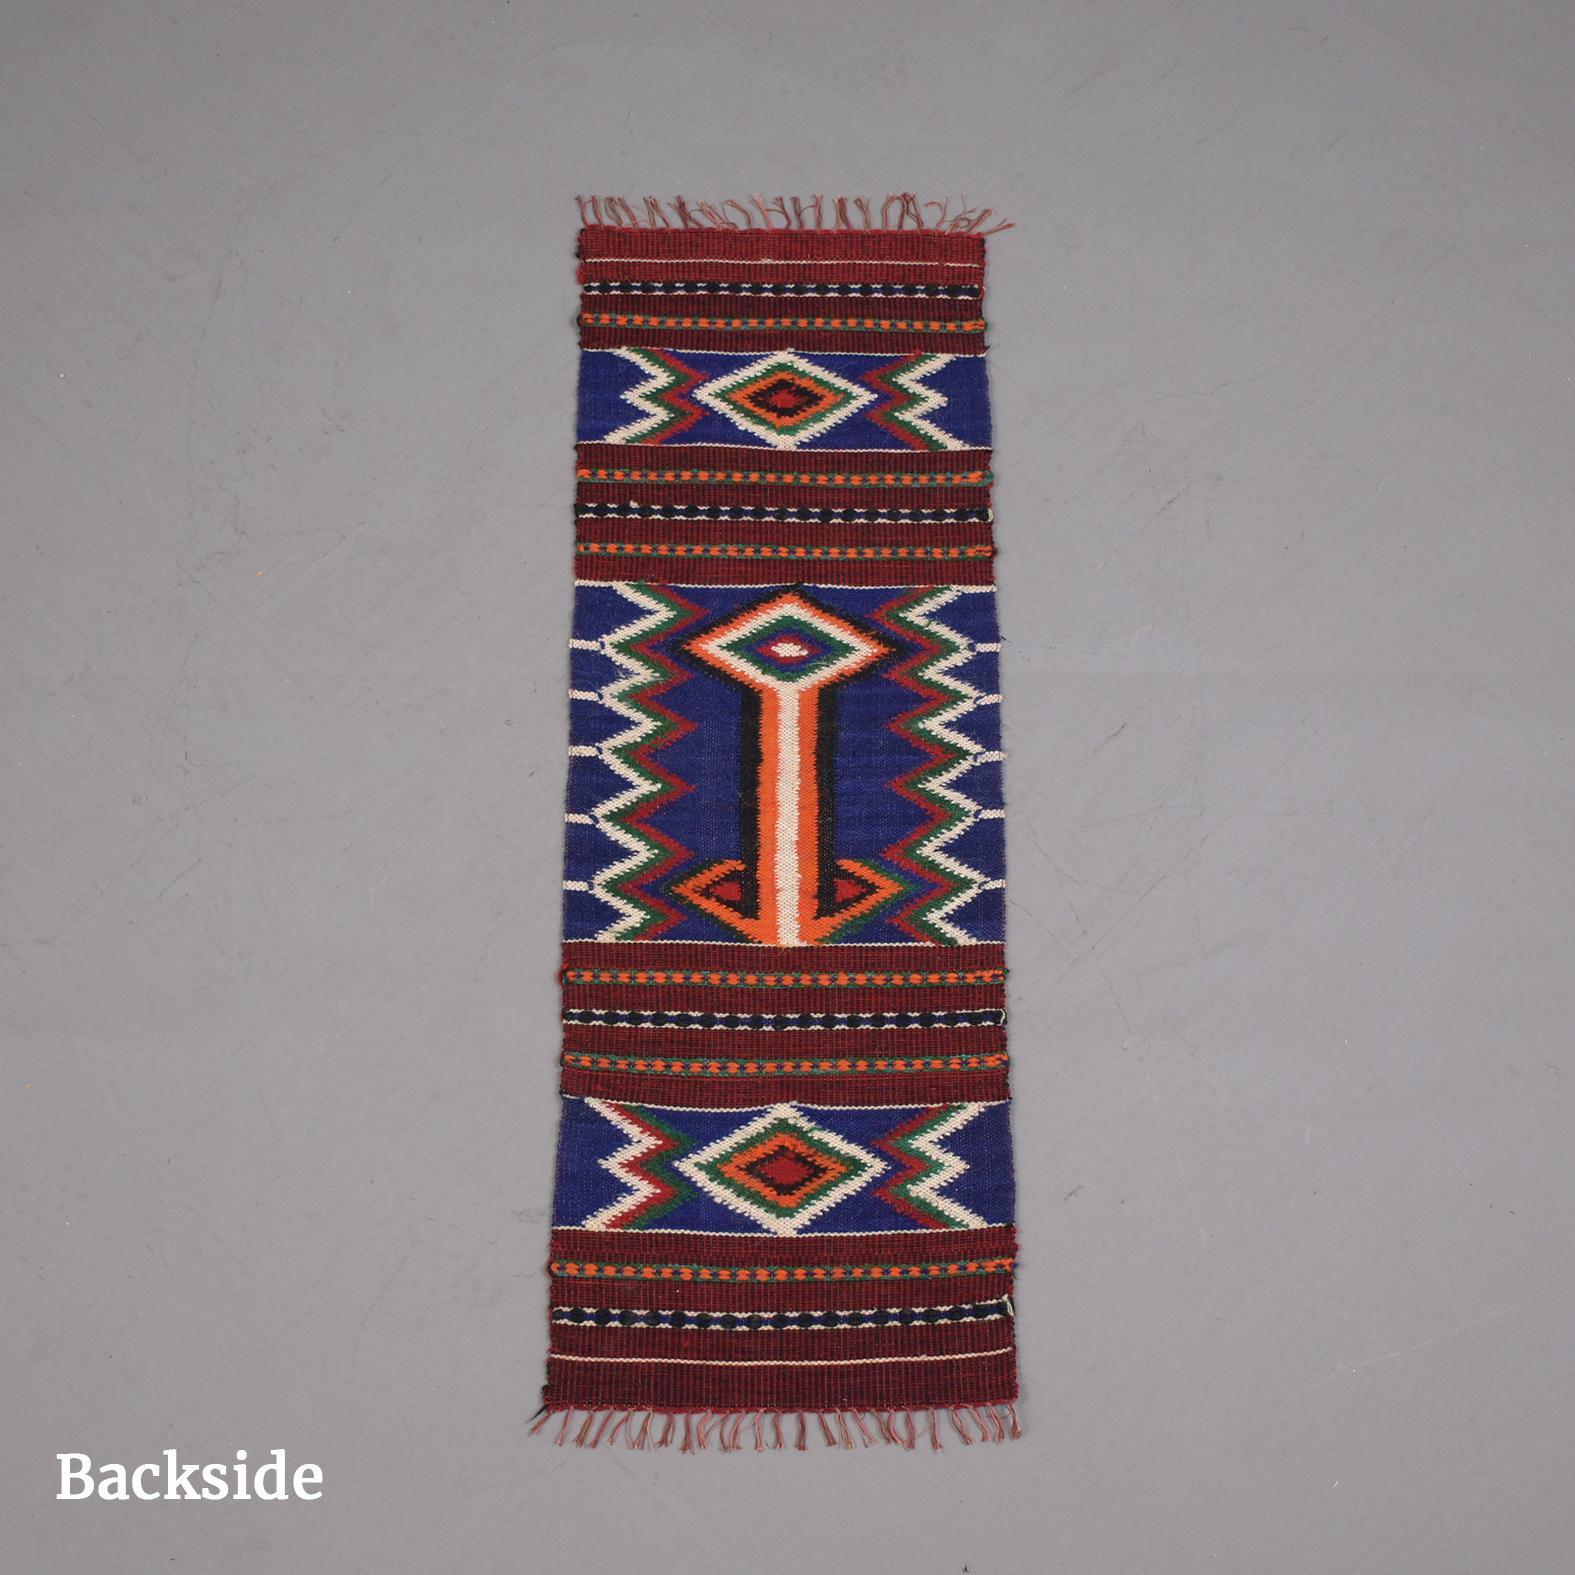 A vintage handwoven Navajo-style rug in good condition. This wool rug features a Native American traditional design pattern of stepped cross-shapes and hooks over a red ground. rendered in a palette of red, blue, white, black, and green.